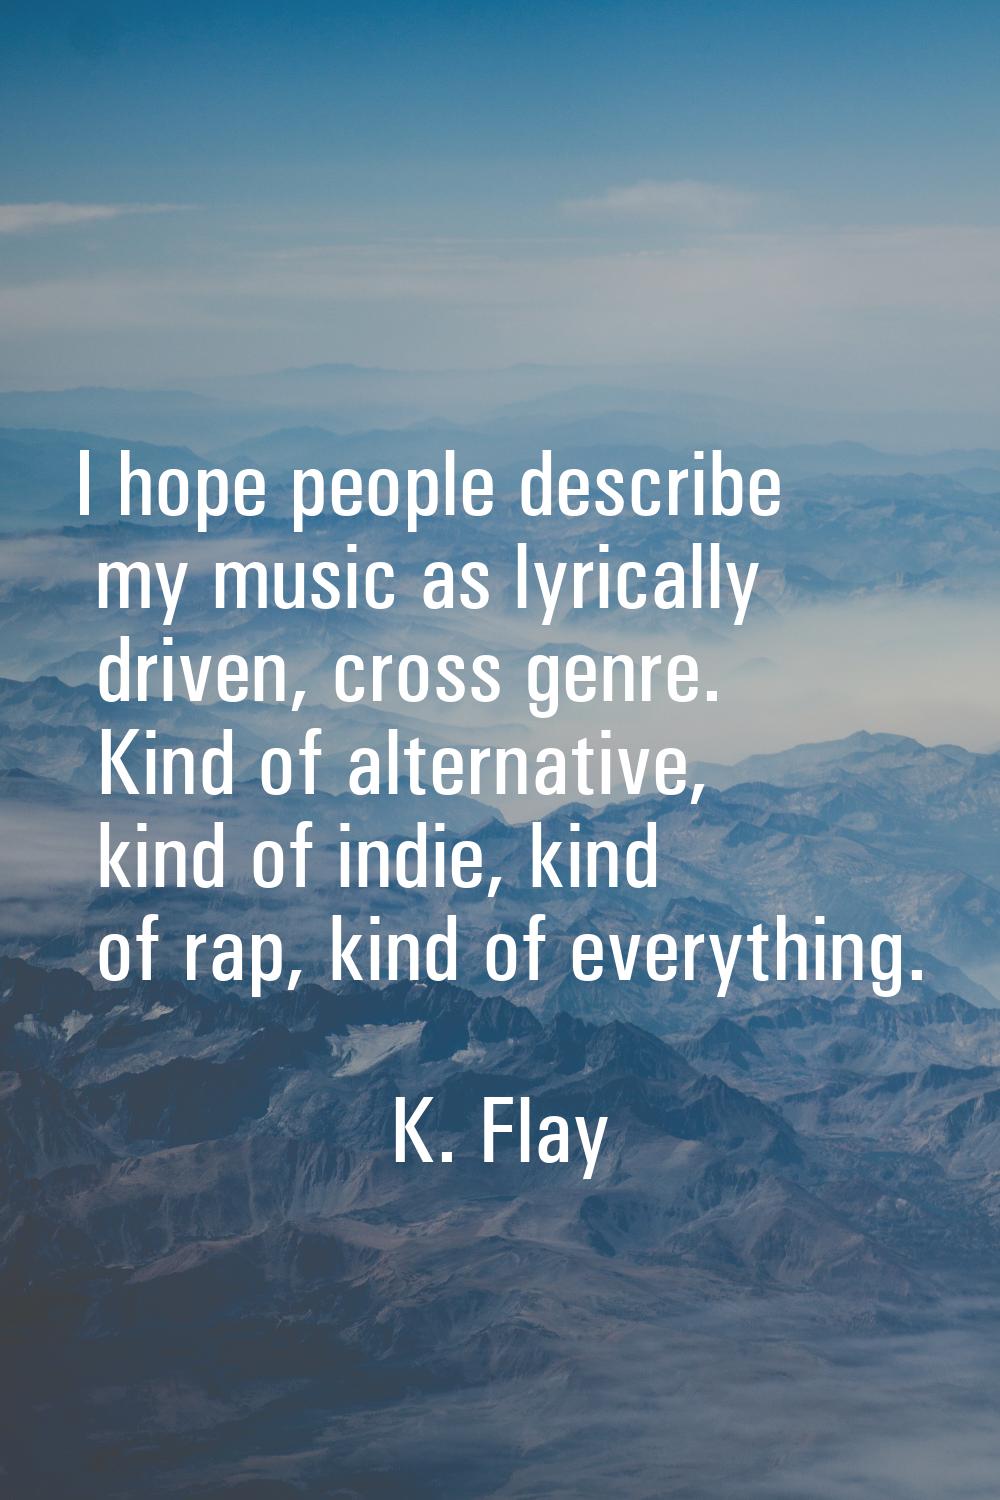 I hope people describe my music as lyrically driven, cross genre. Kind of alternative, kind of indi